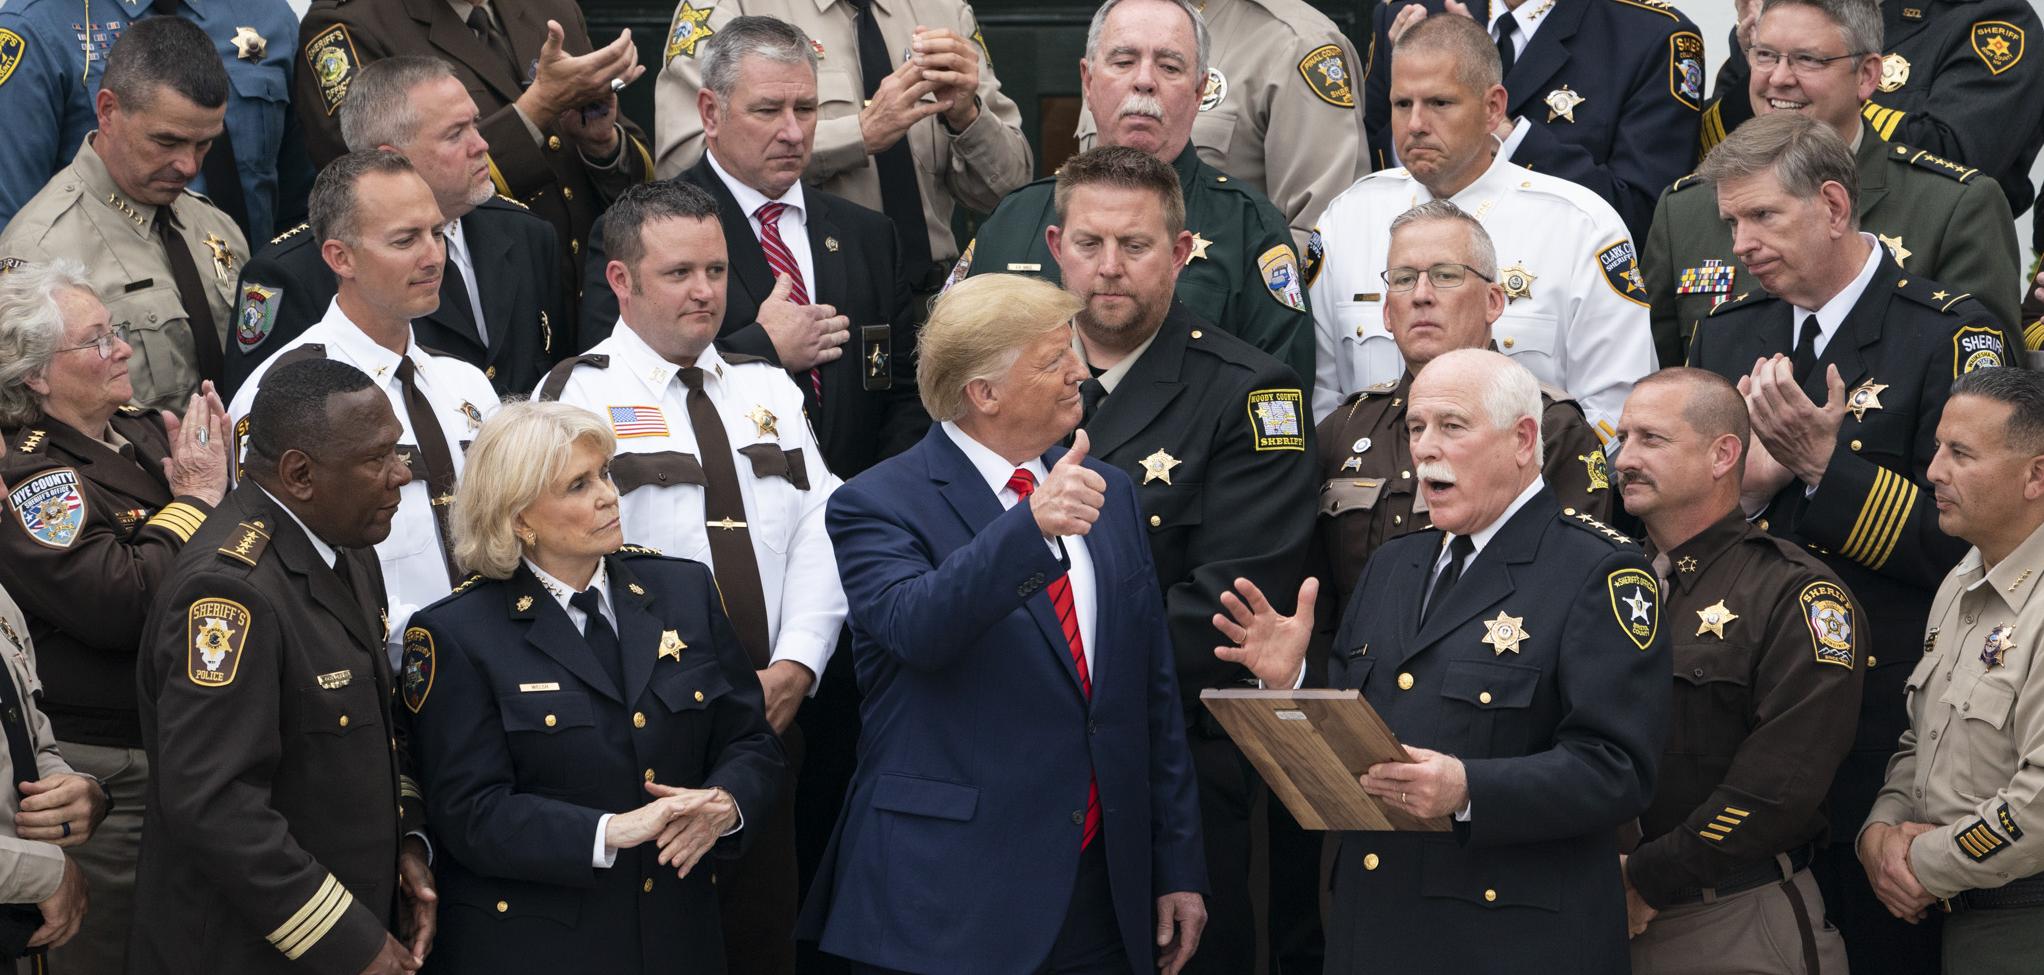 President Donald J. Trump gives a thumbs-up as he is presented with a plaque of recognition by “The Nation’s Sheriffs,” Thursday, Sept. 26, 2019, at the South Portico of the White House. (Official White House Photo by Joyce N. Boghosian)